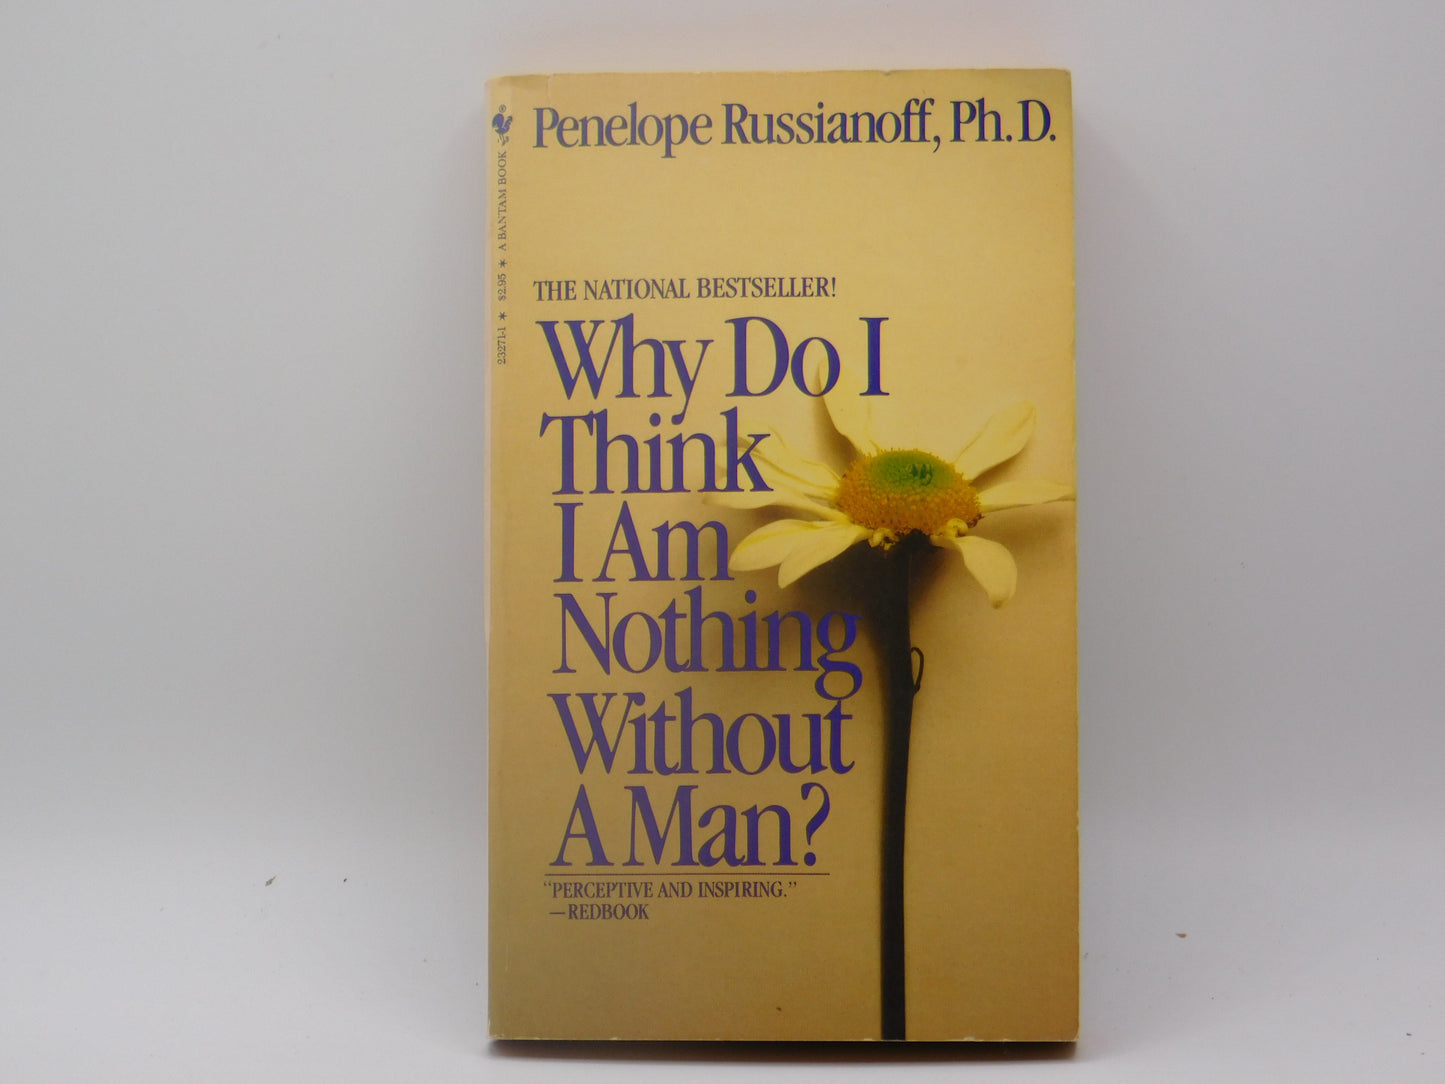 Why Do I Think I Am Nothing Without A Man? by Penelope Russianoff